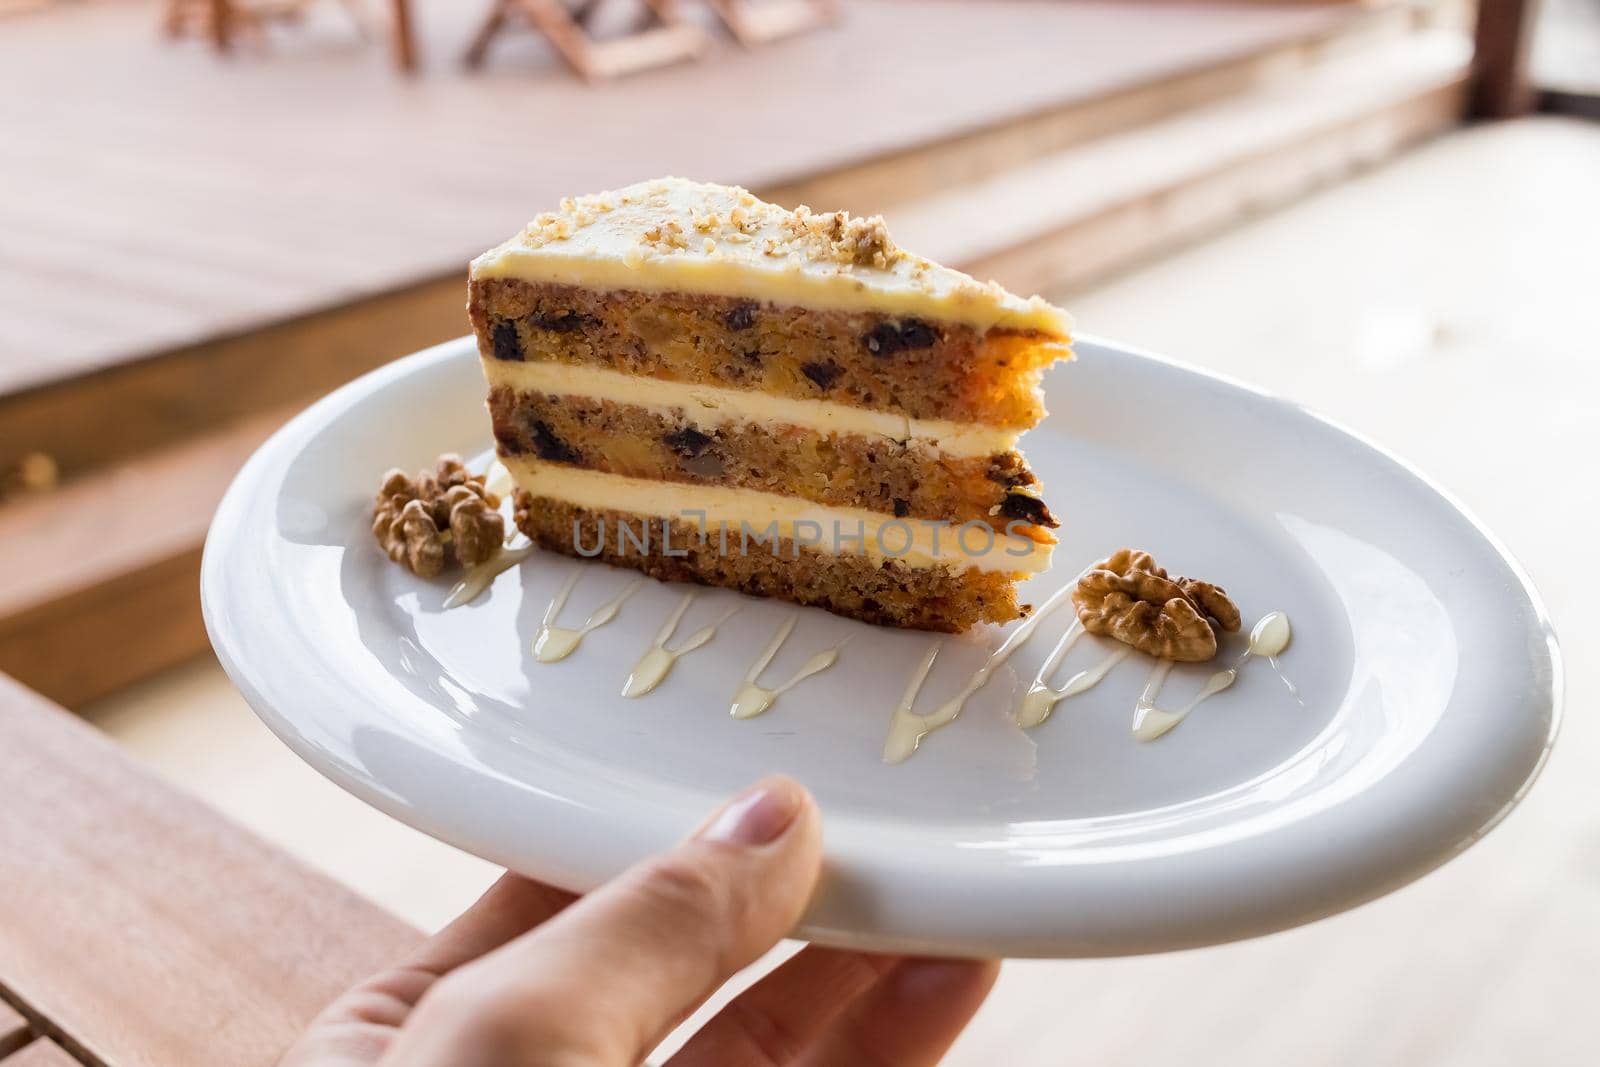 carrots and pumpkin cake with coffee cream in a cut on the plate.Delicious sliced carrot cake.Slice of cake on a white ceramic plate in hand, decorated with walnuts, by YuliaYaspe1979